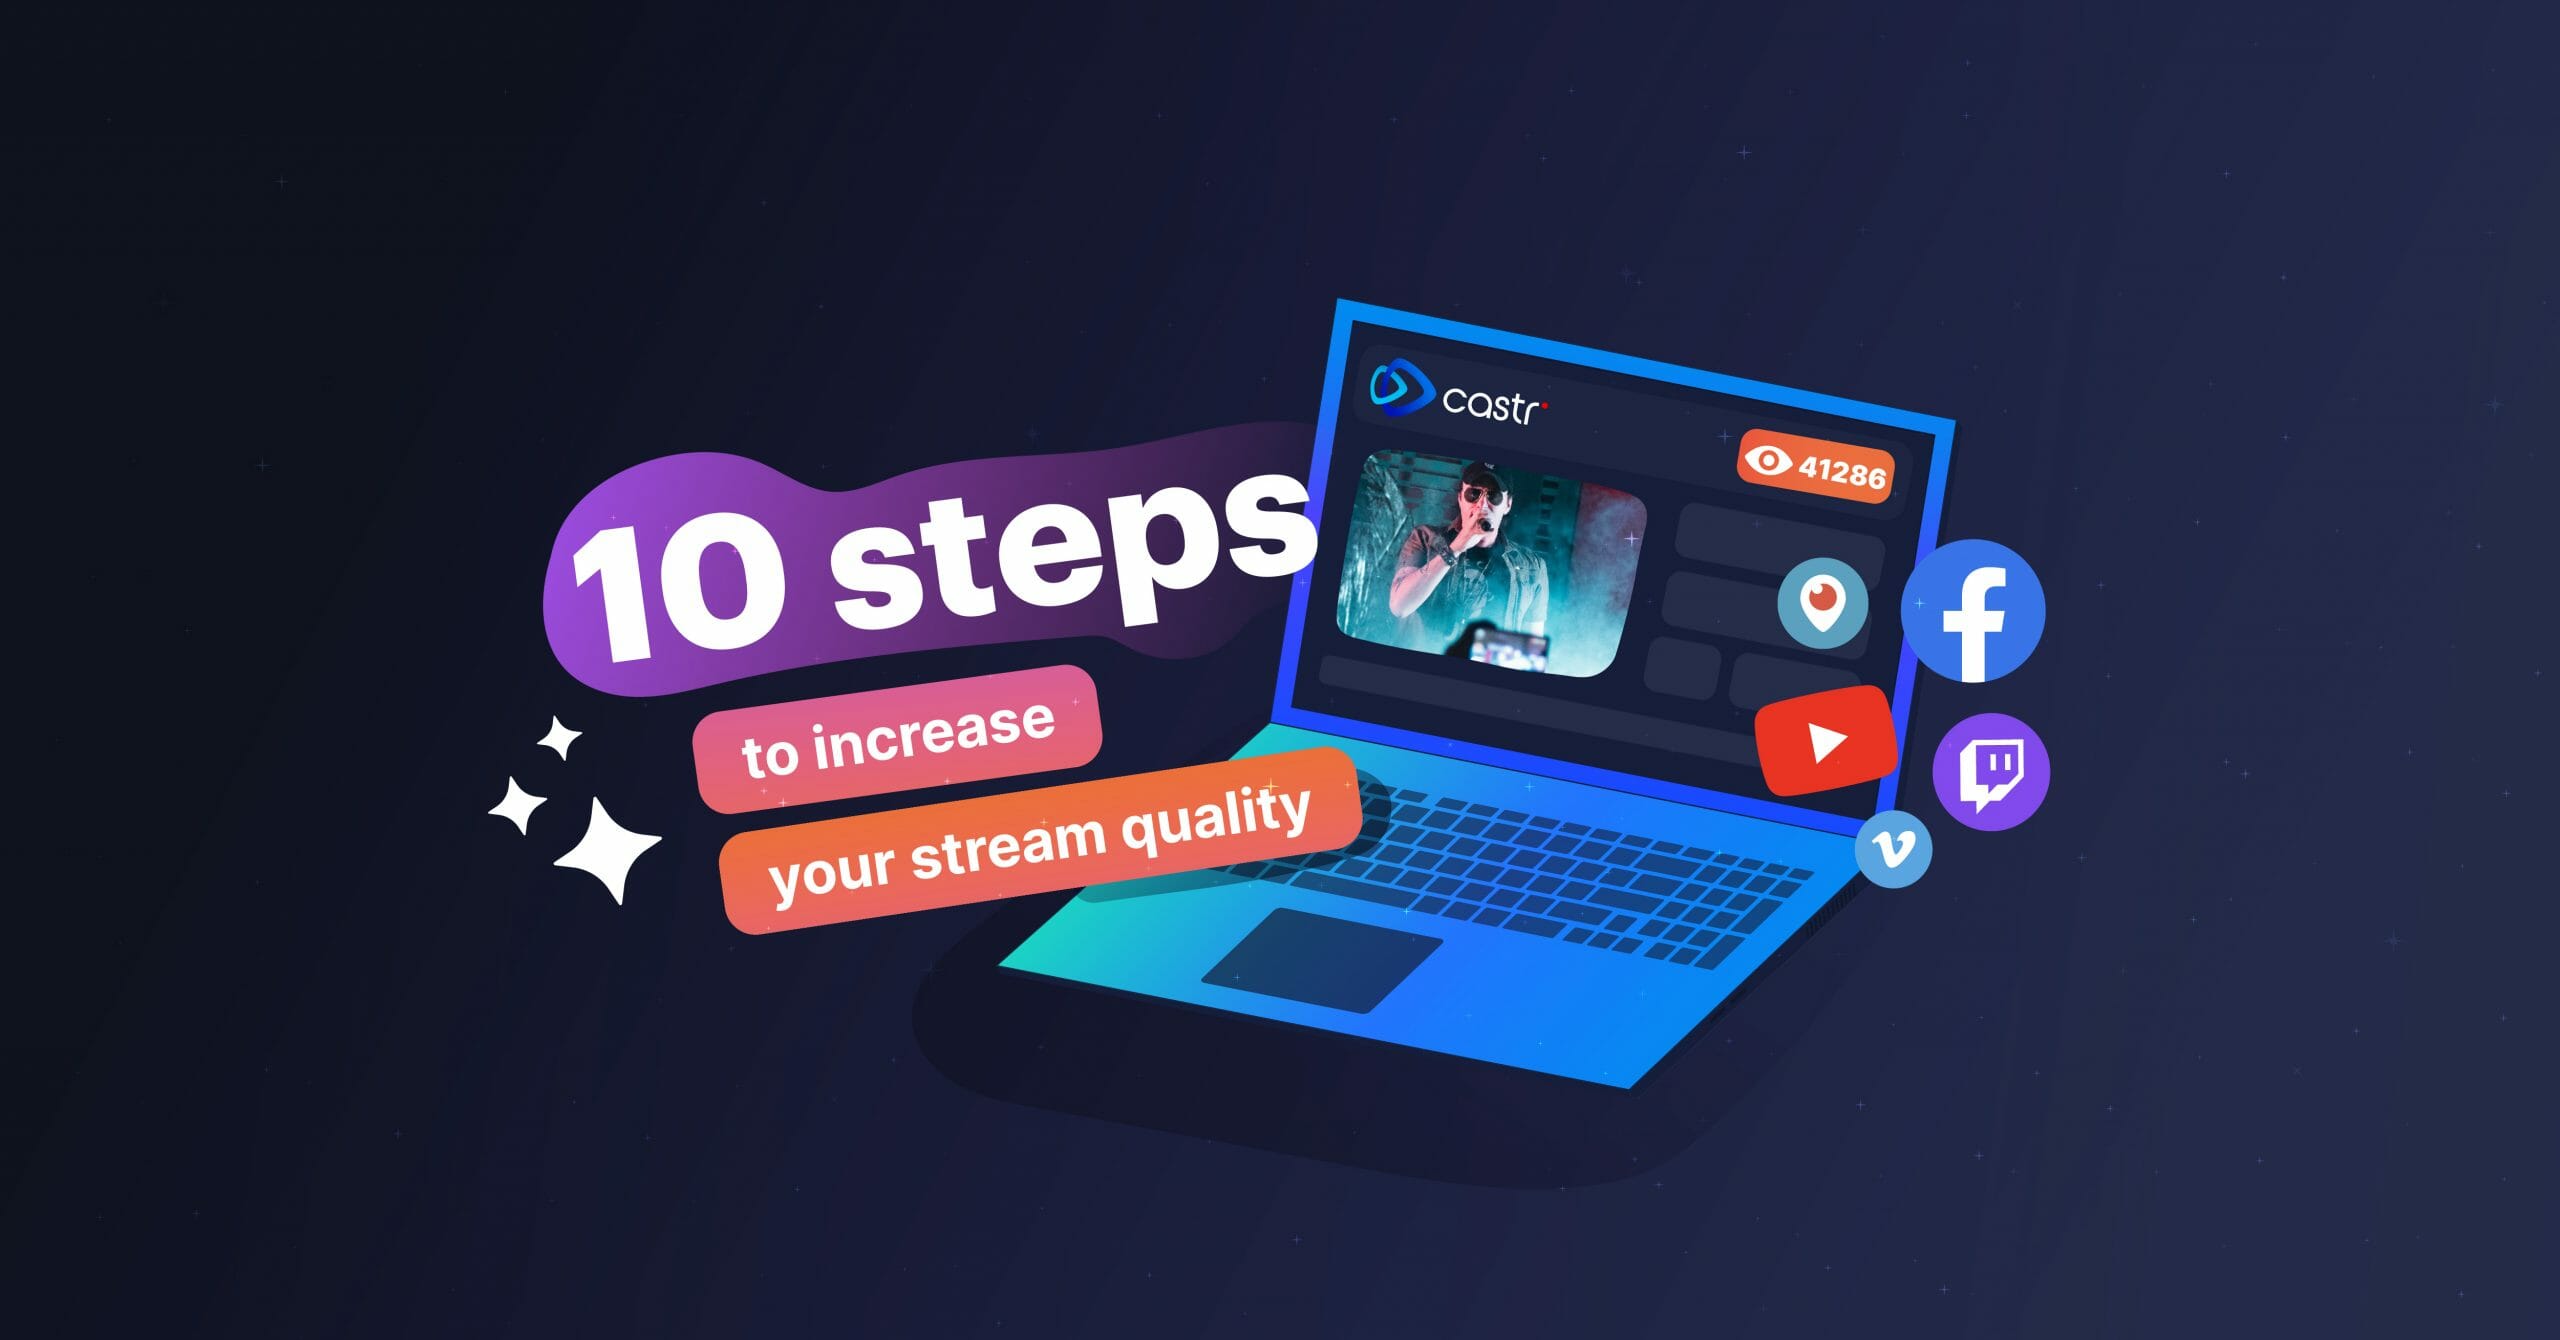 How to Increase Stream Quality in 10 Steps